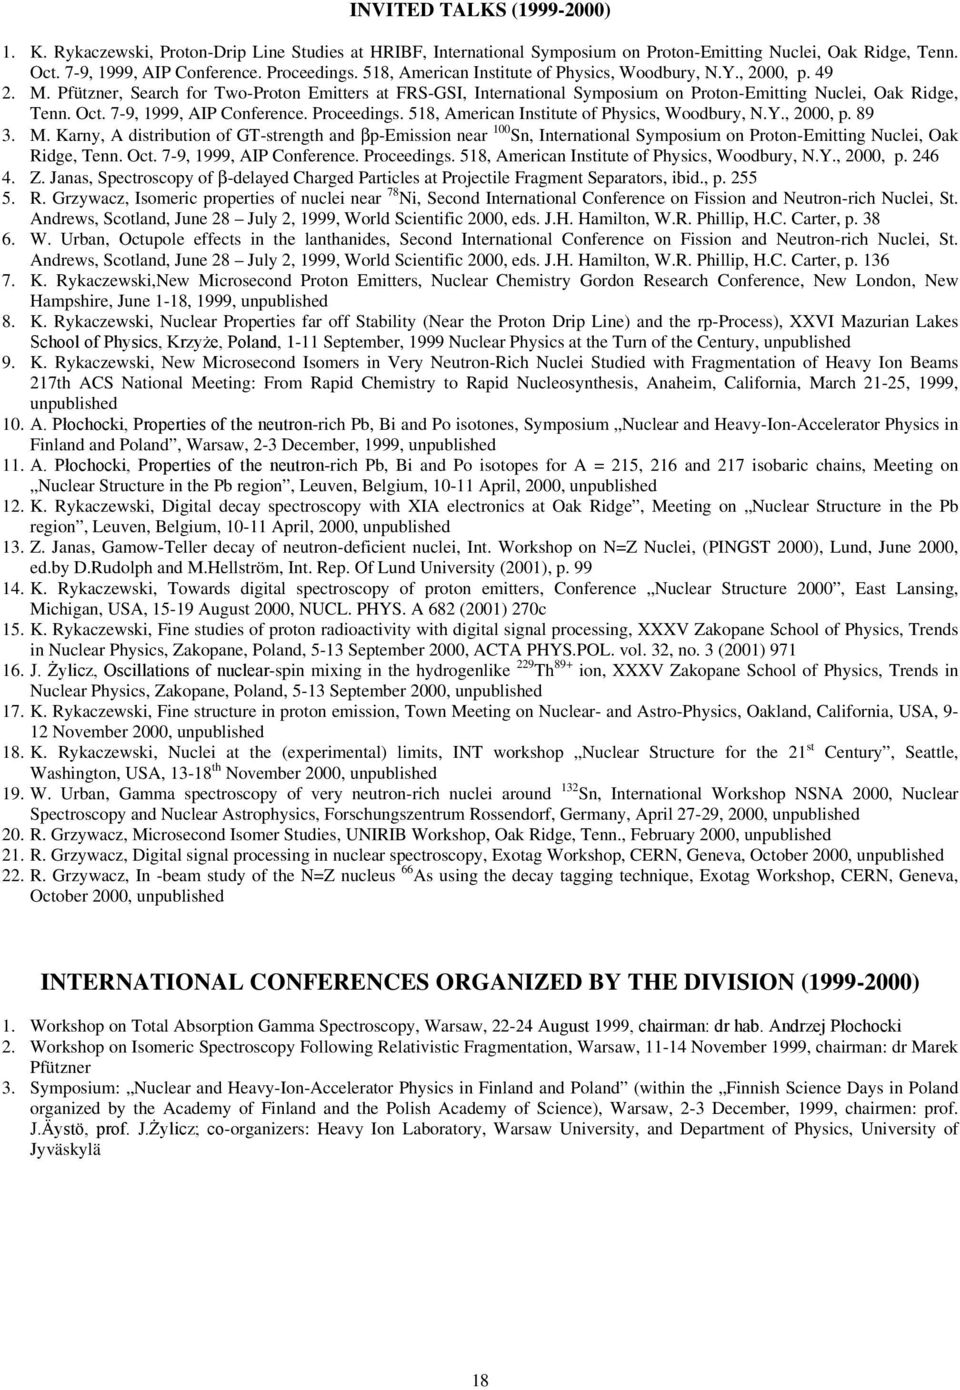 7-9, 1999, AIP Conference. Proceedings. 518, American Institute of Physics, Woodbury, N.Y., 2000, p. 89 3. M.